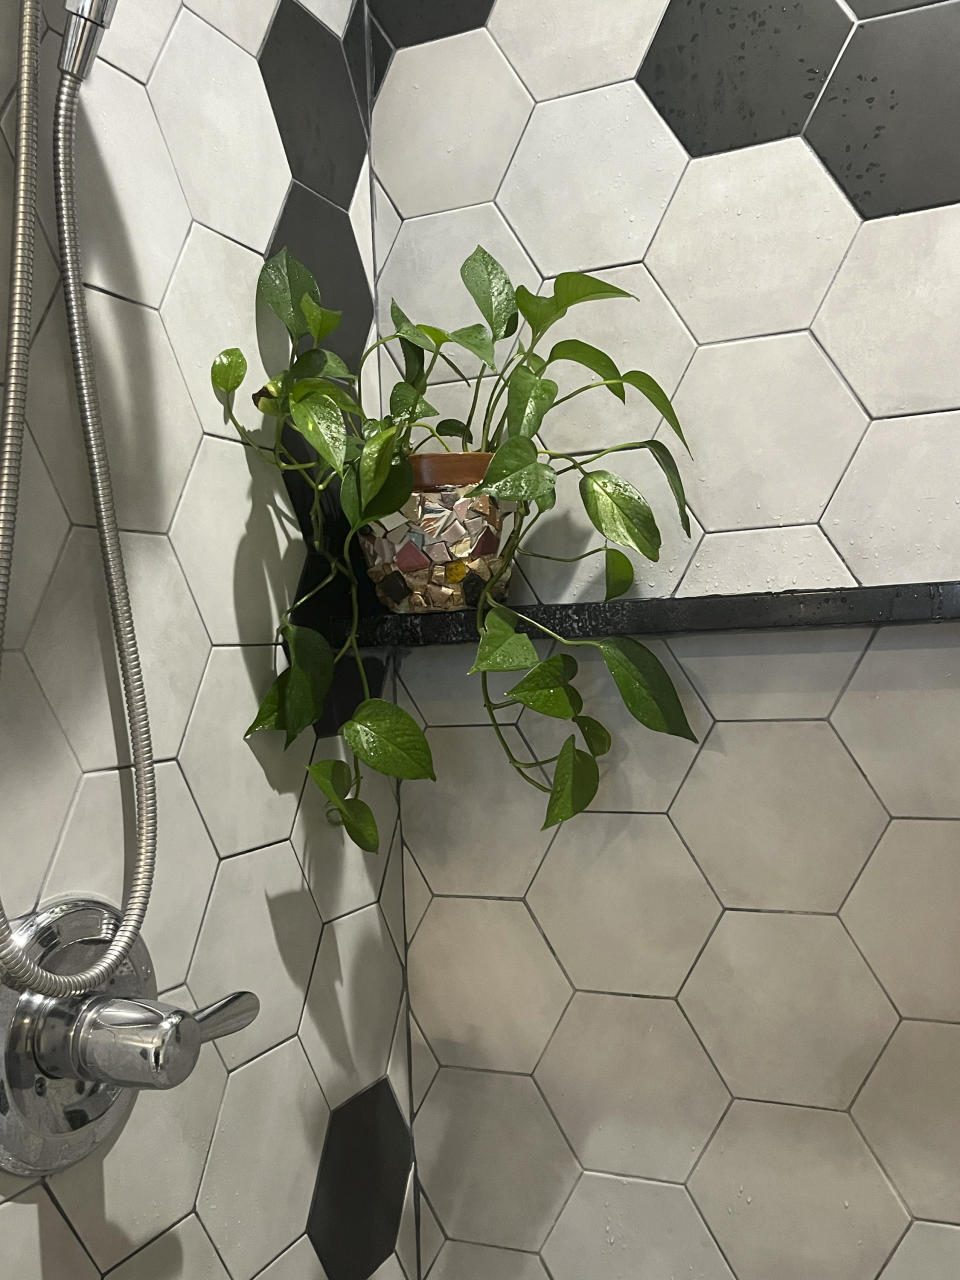 This Nov. 27, 2023, image provided by Stephanie Anderson shows a pothos houseplant displayed on a shower shelf in Patchogue, New York. (Stephanie Anderson via AP)